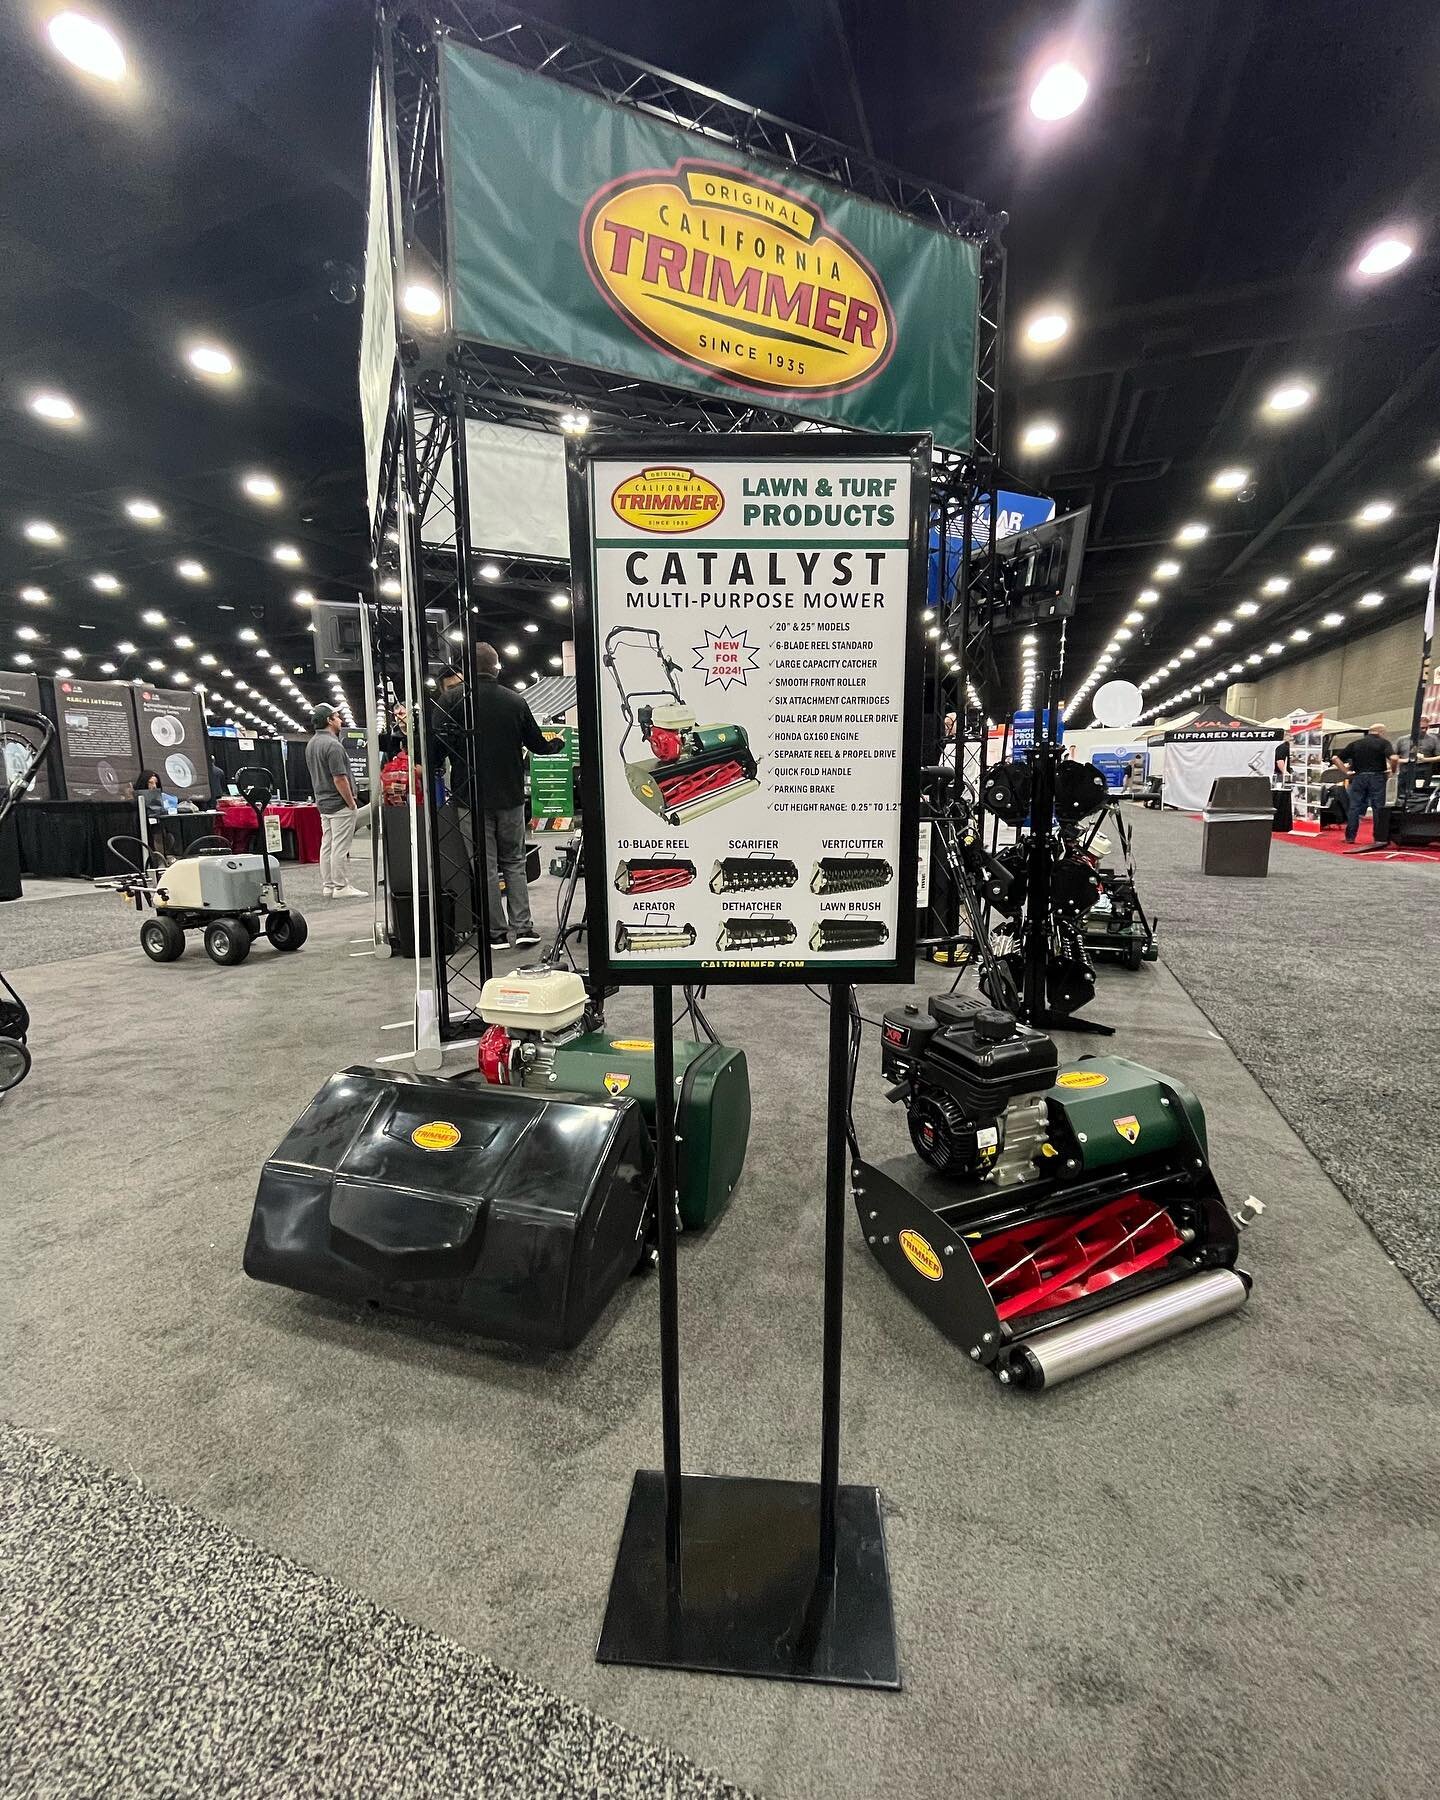 Had a great time at the GIE Expo and got a sneak peek at California Trimmer&rsquo;s upcoming products. The &ldquo;Crossover&rdquo; will be available in a 20&rdquo; model, which is an electrified version of their current &ldquo;Homeowner&rdquo; standa